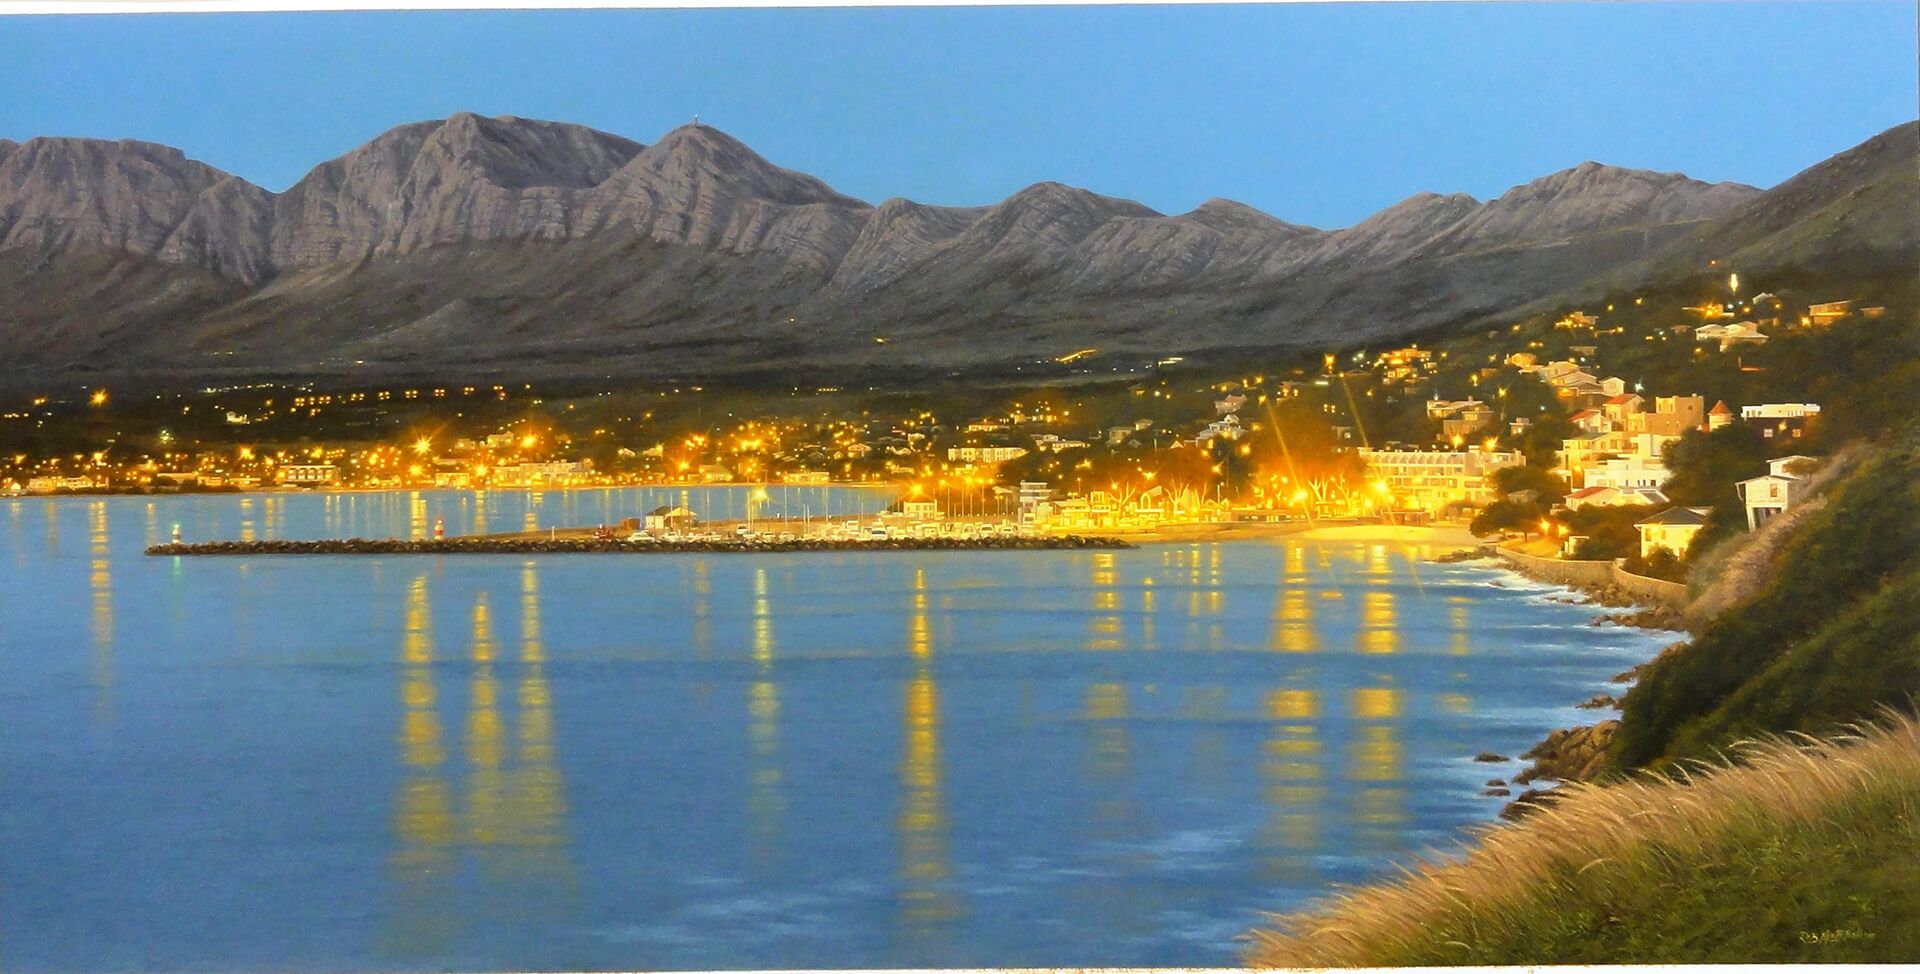 Photorealistic painting of a night scene over Gordon's Bay